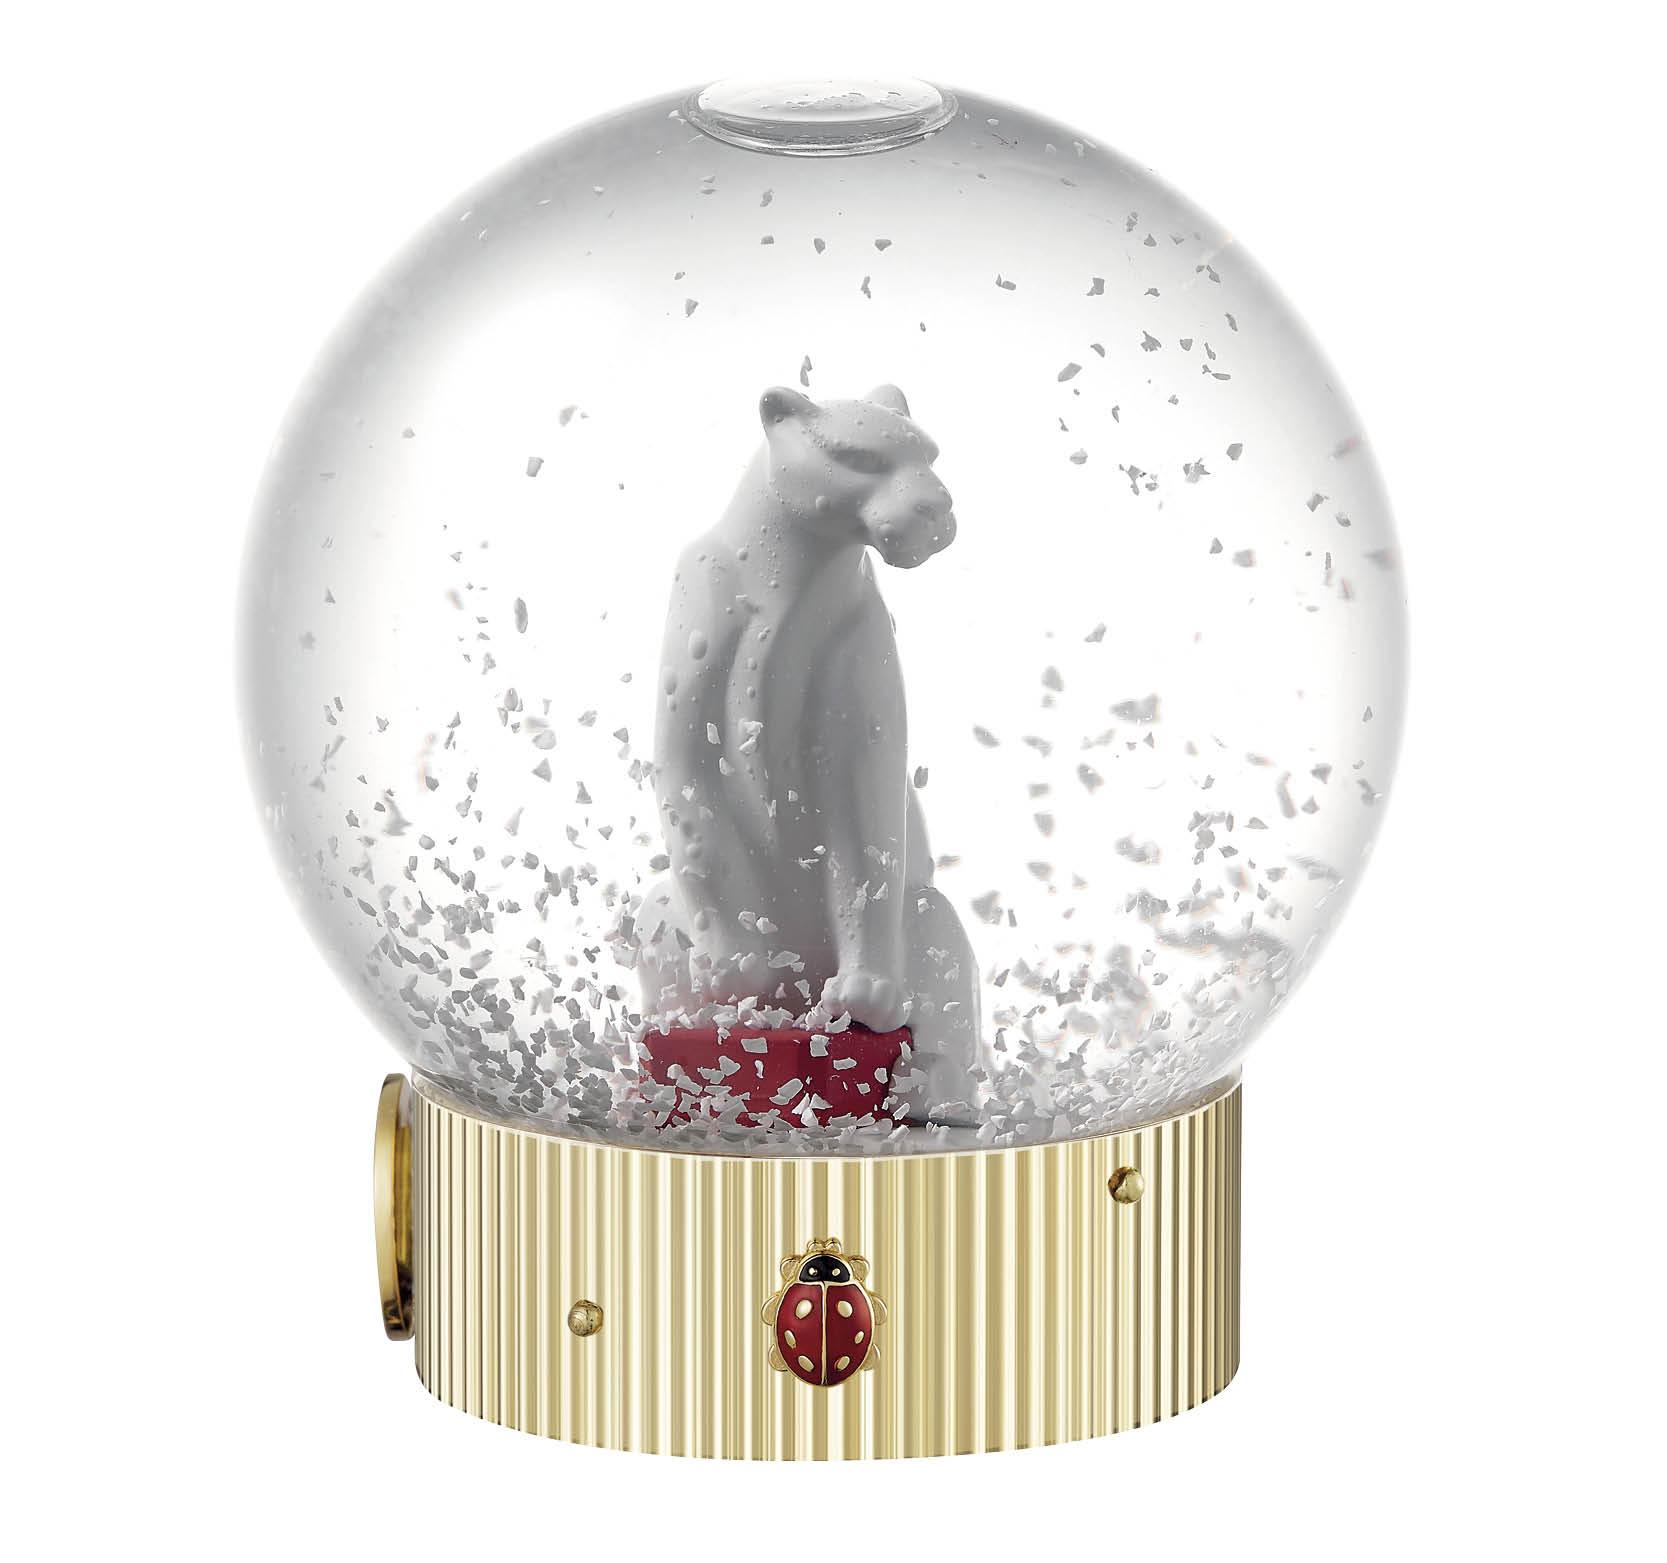 Treat Yourself to a Peaceful Christmas with Our Selected Embellishments